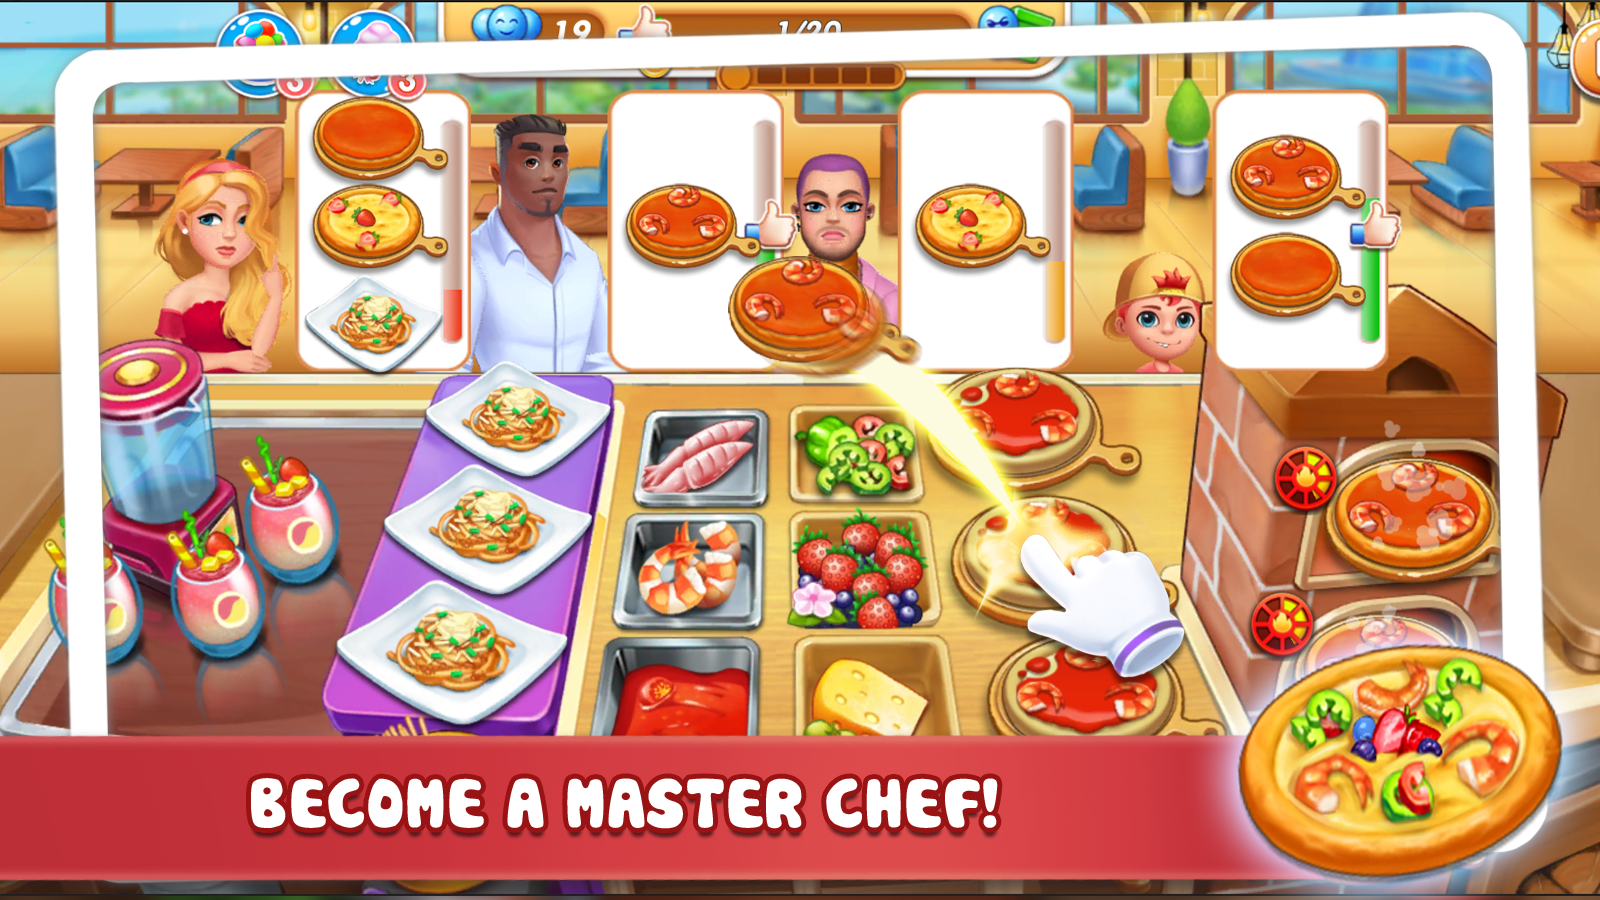 Screenshot 1 of Cooking Life: Master Chef & Fever Cooking Game 10.2